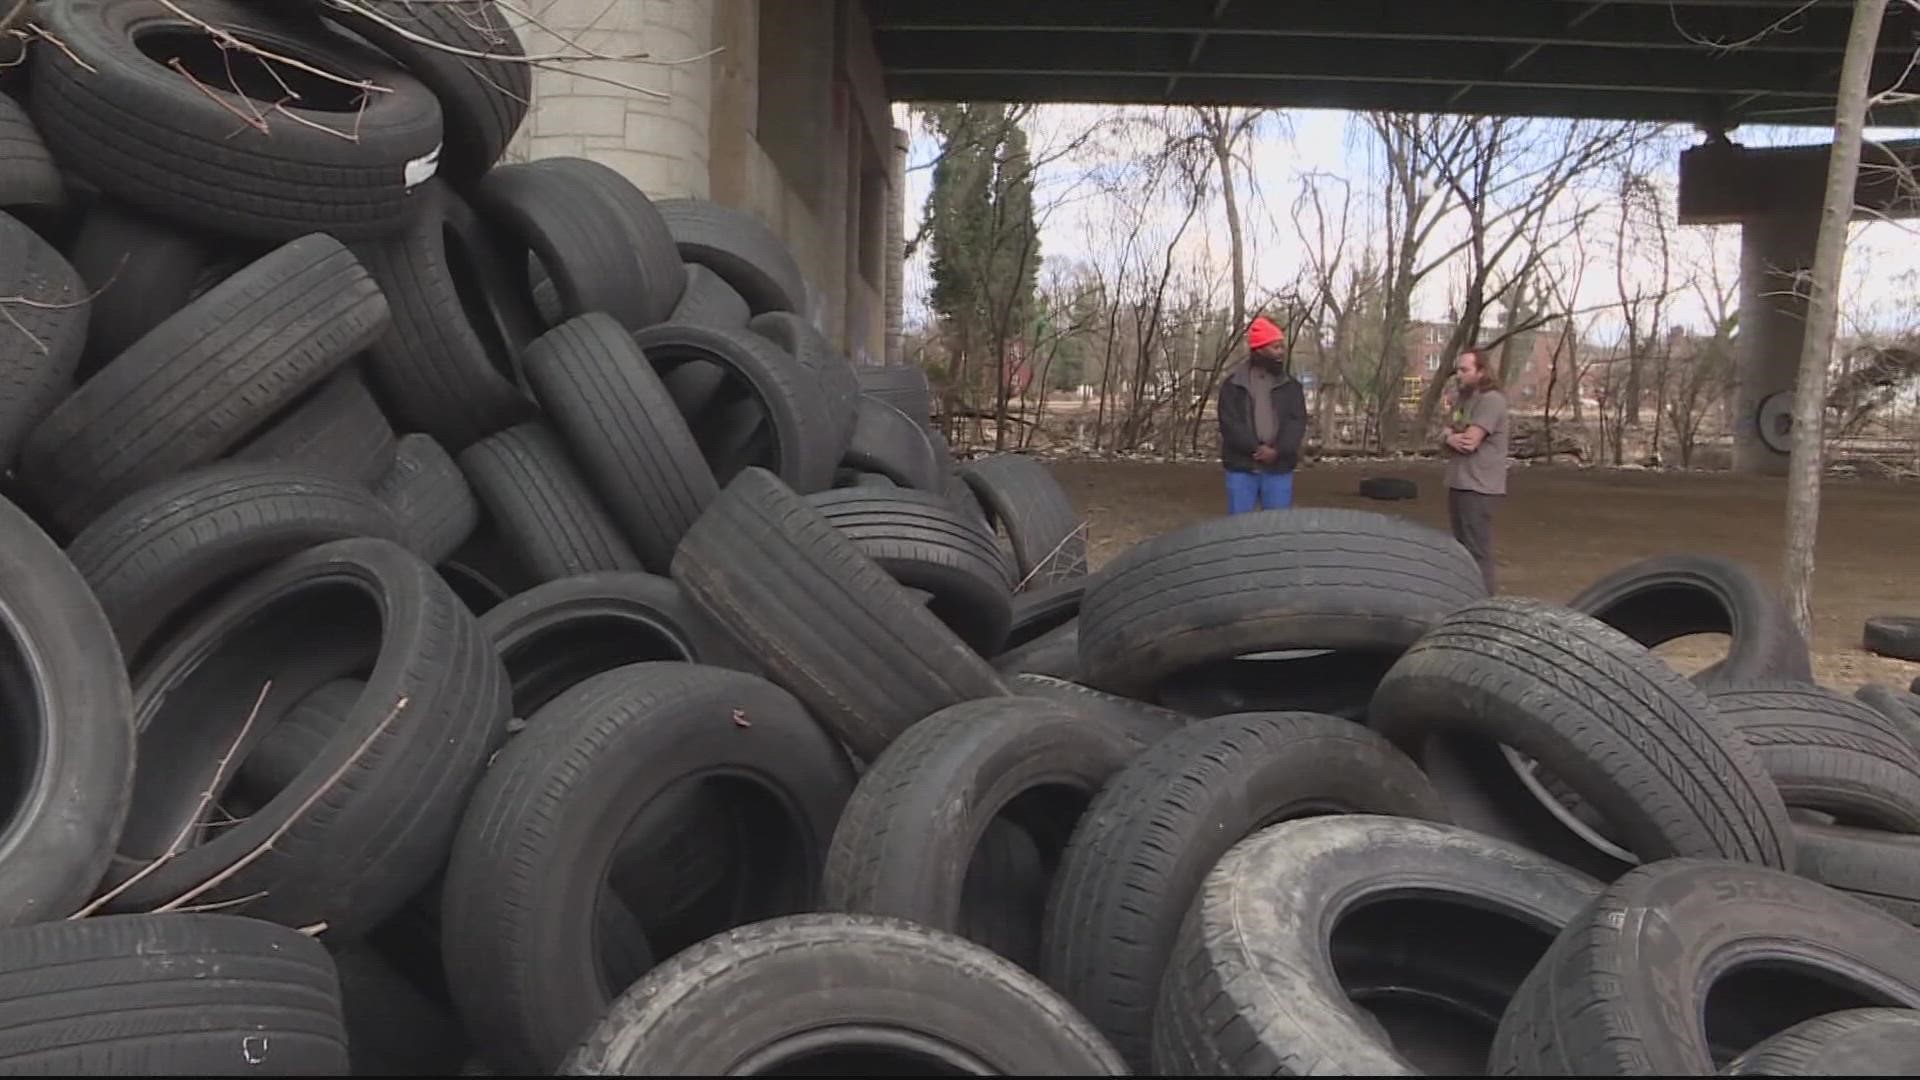 The National Park Service is taking action to investigate the dumping and get the tires removed.